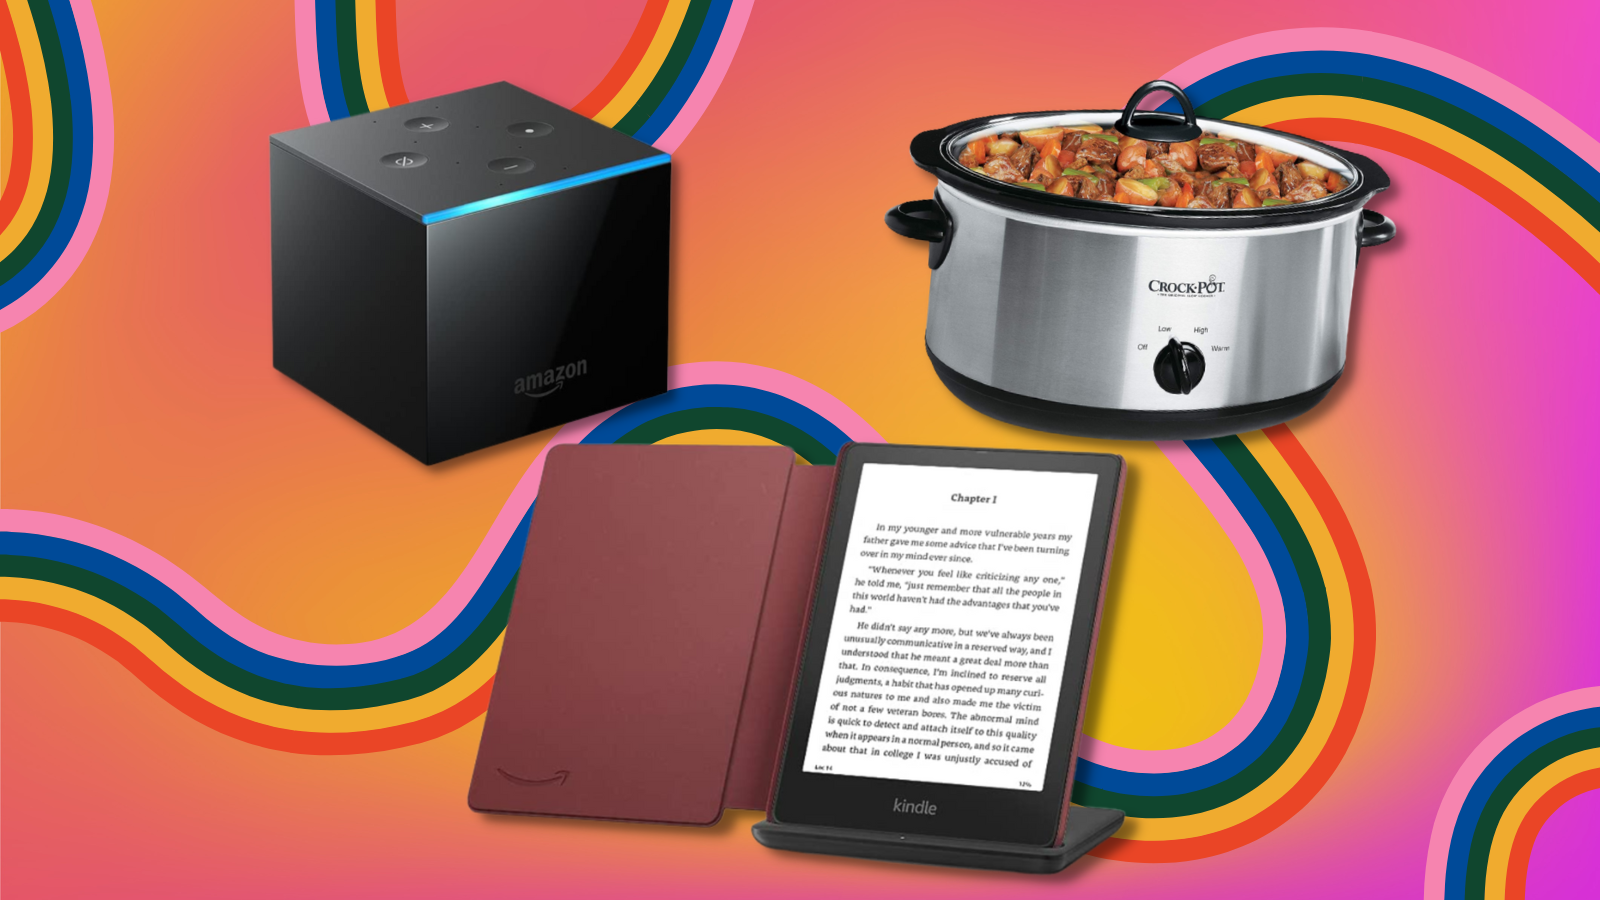 fire tv cube, crockpot, and fire tablet with colorful background